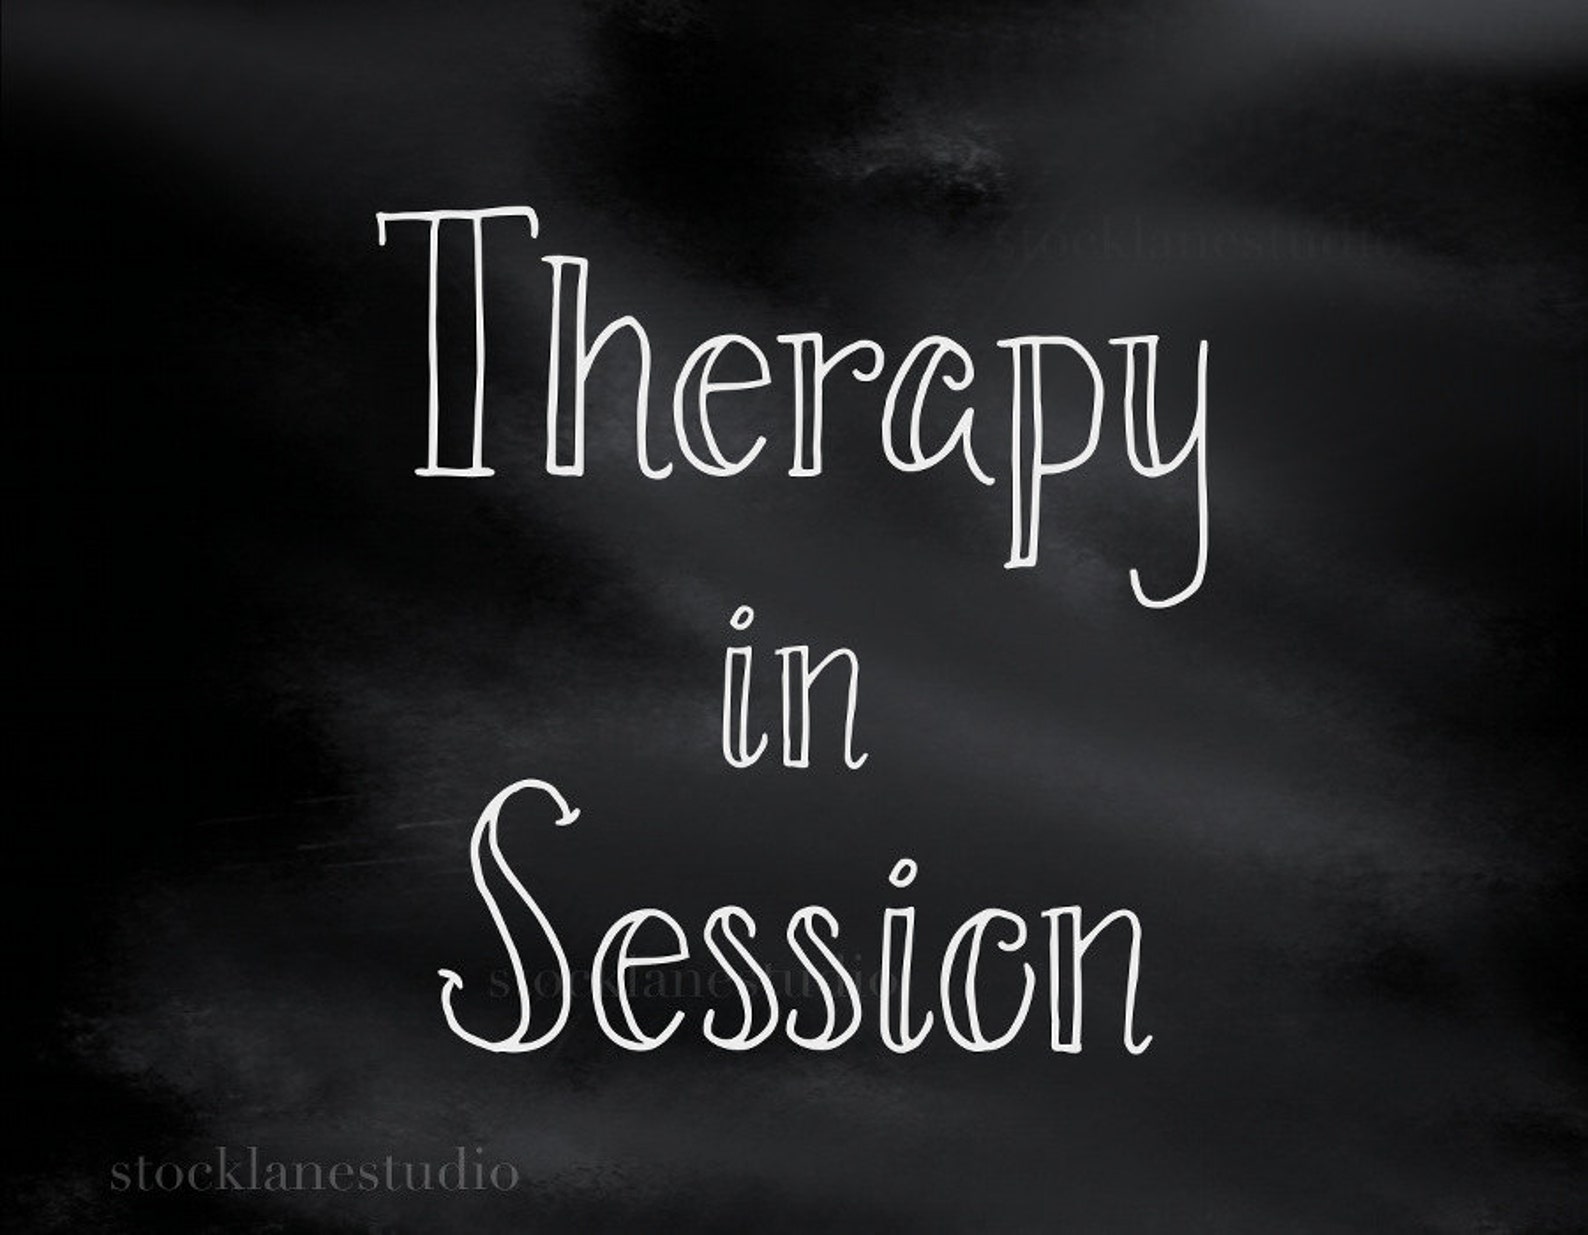 therapy-in-session-printable-black-white-office-door-sign-do-etsy